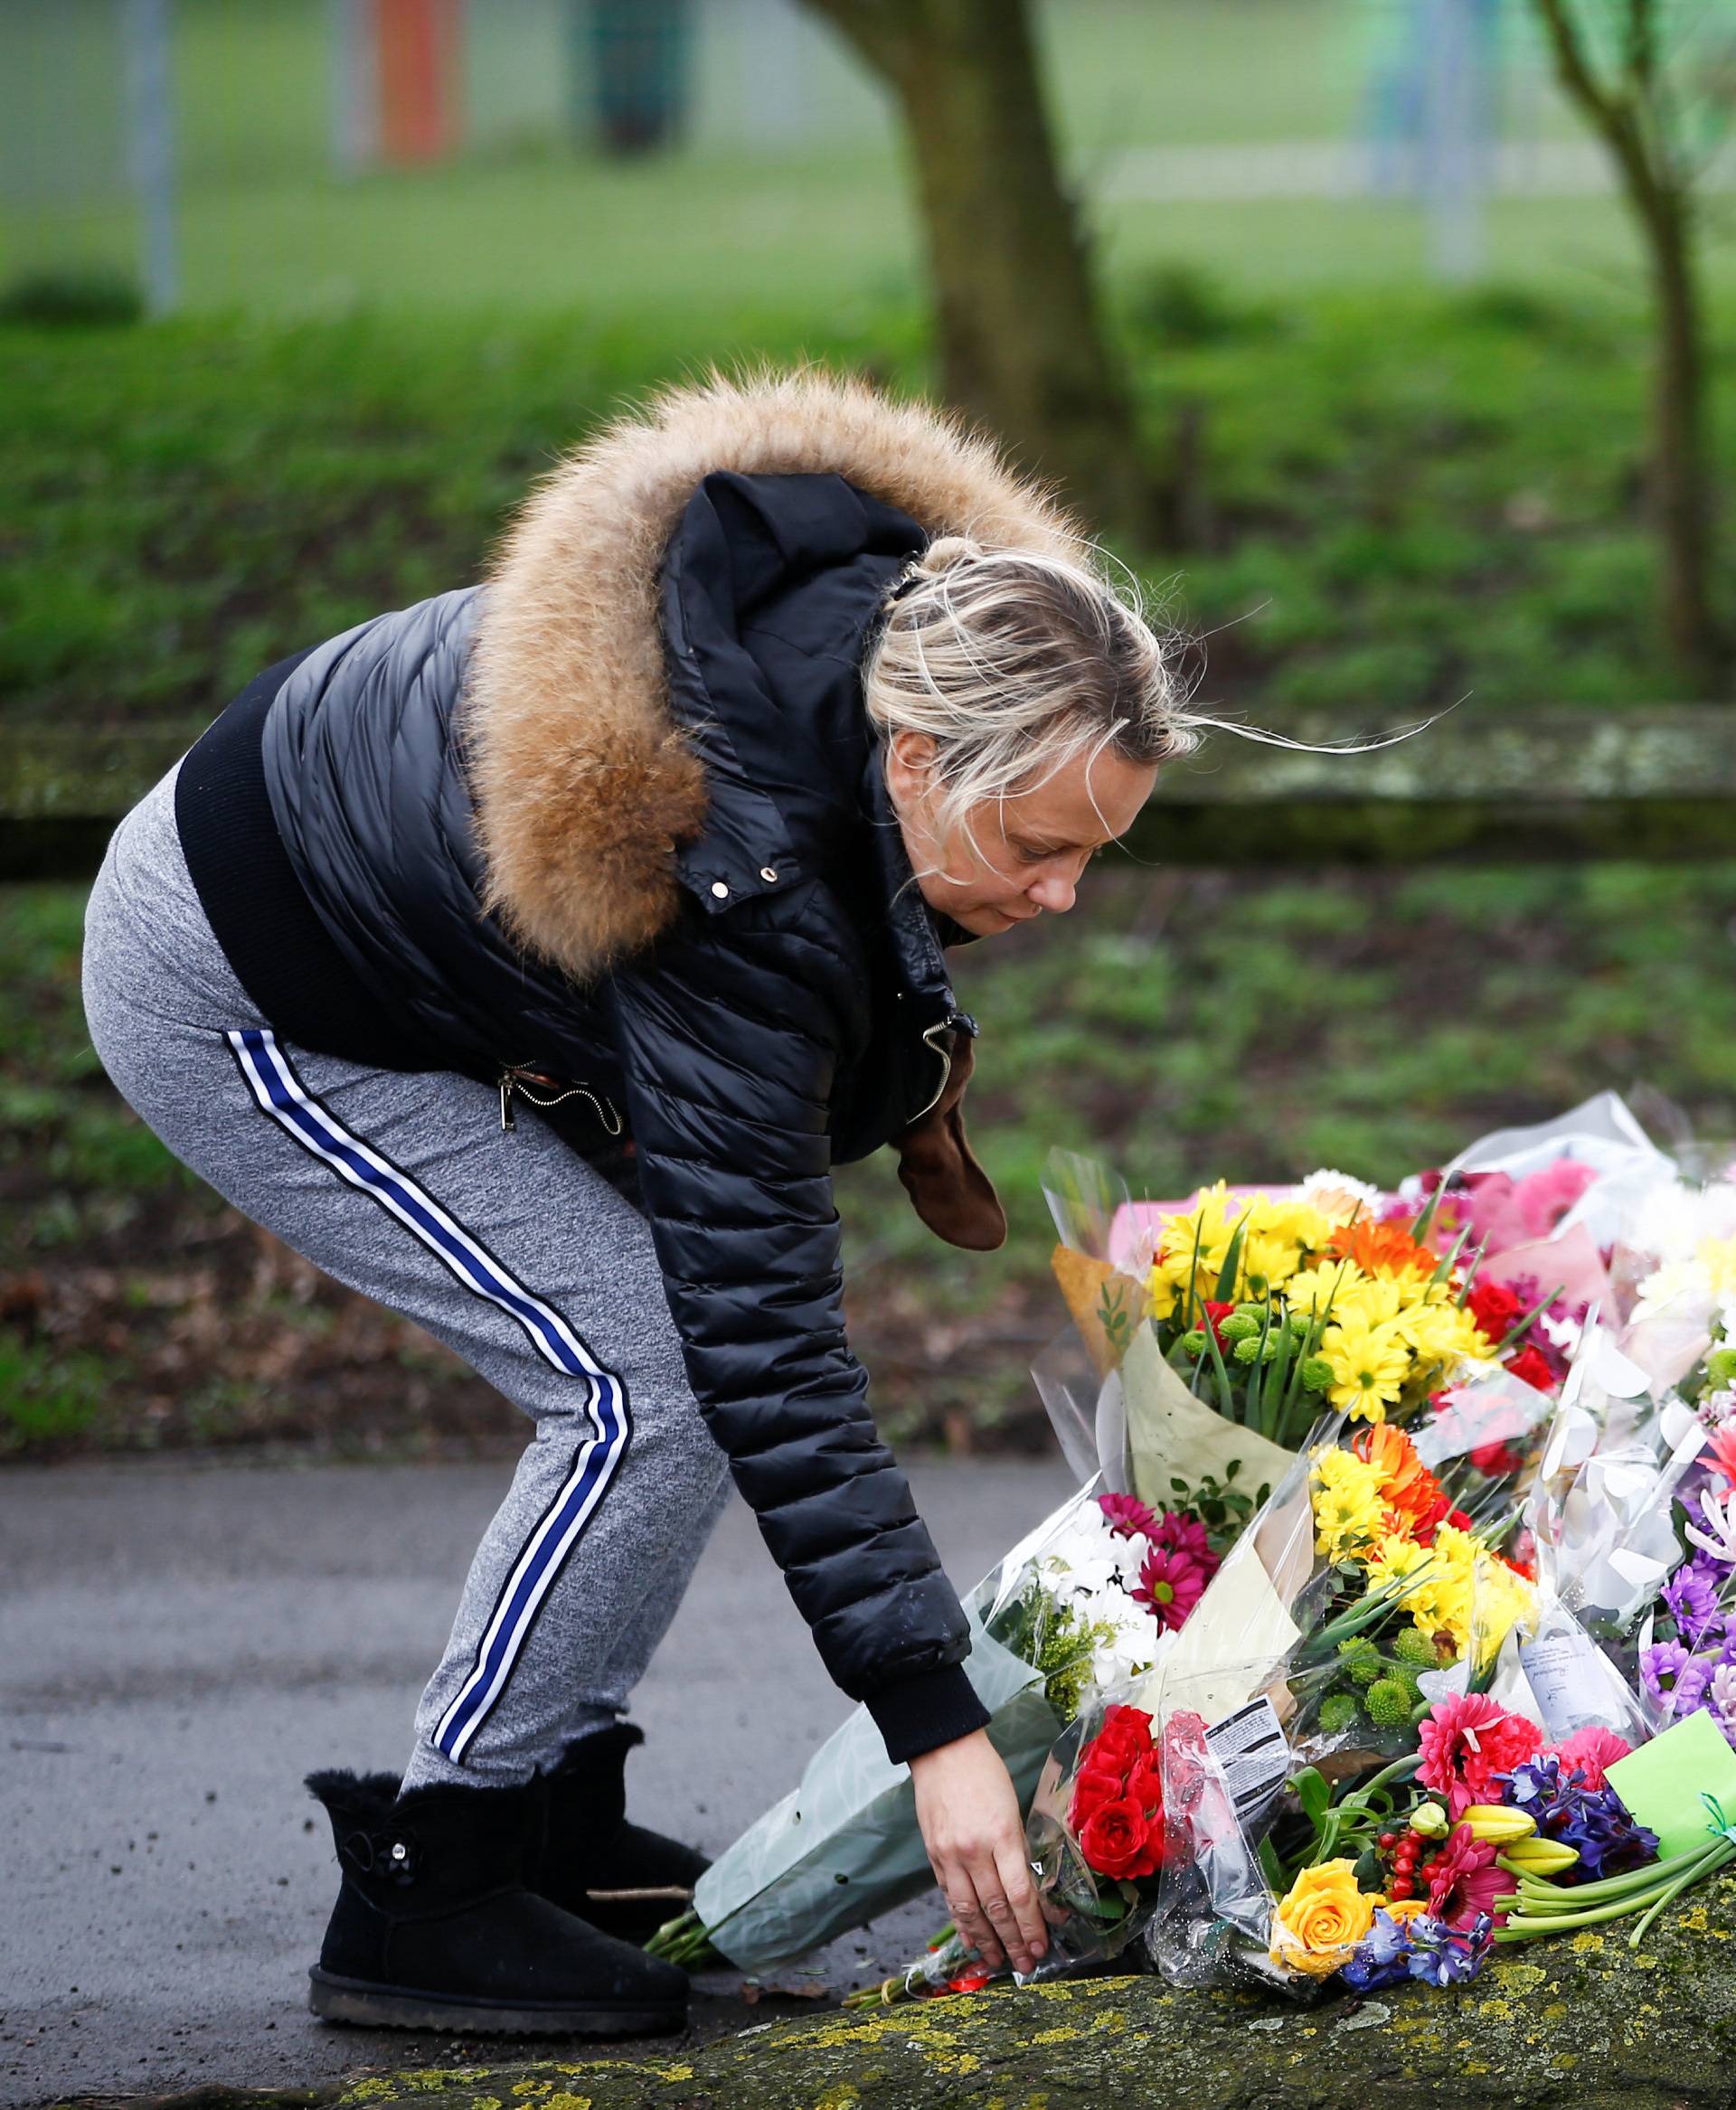 A woman lays flowers near to where 17-year-old Jodie Chesney was killed, at the Saint Neots Play Park in Harold Hill, east London